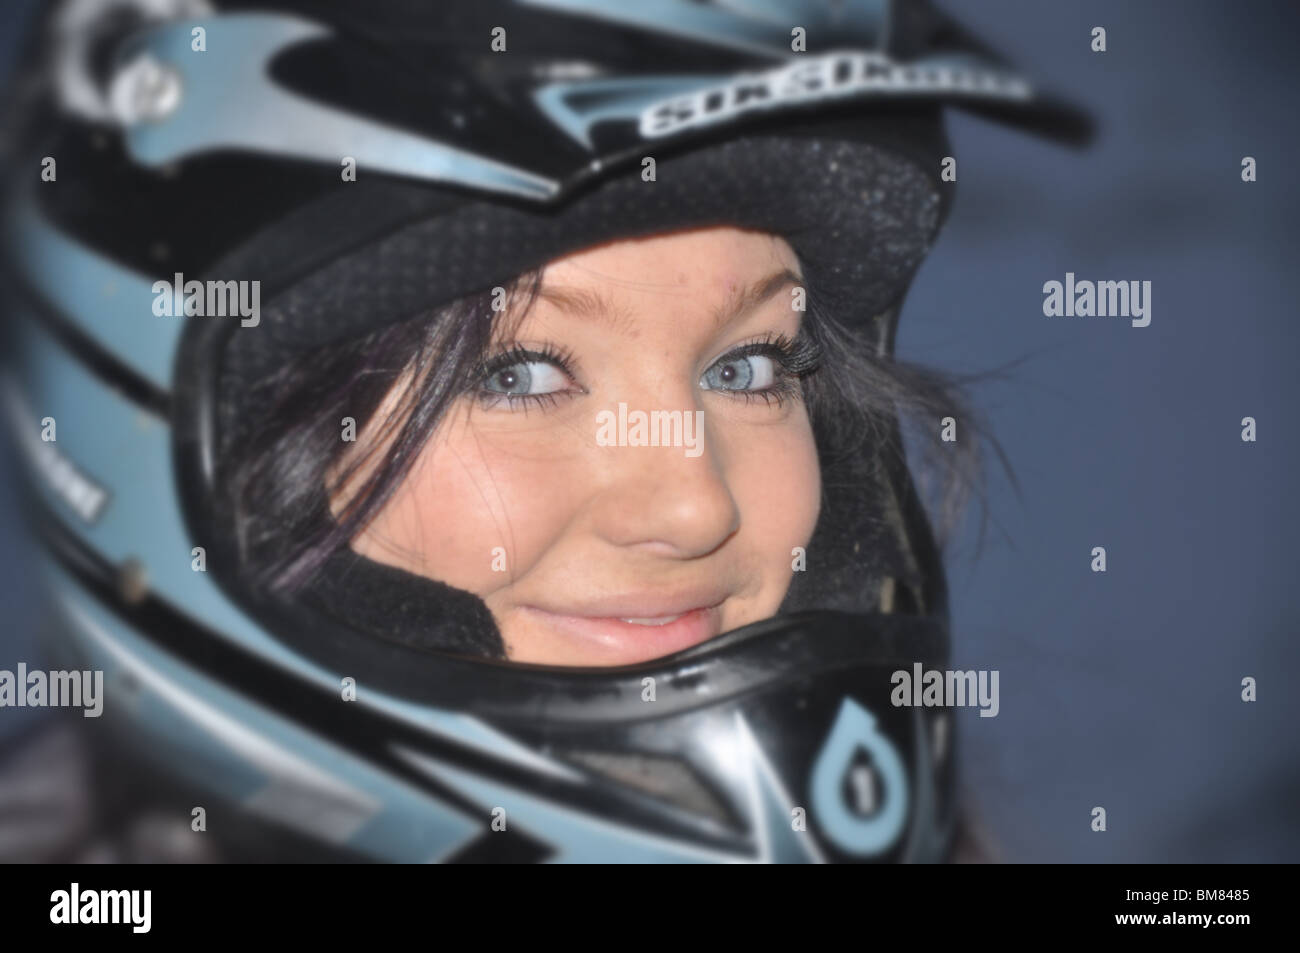 Girl portrait in BMX downhill helmet showing her blue eyes and happy cheeky smile. Stock Photo